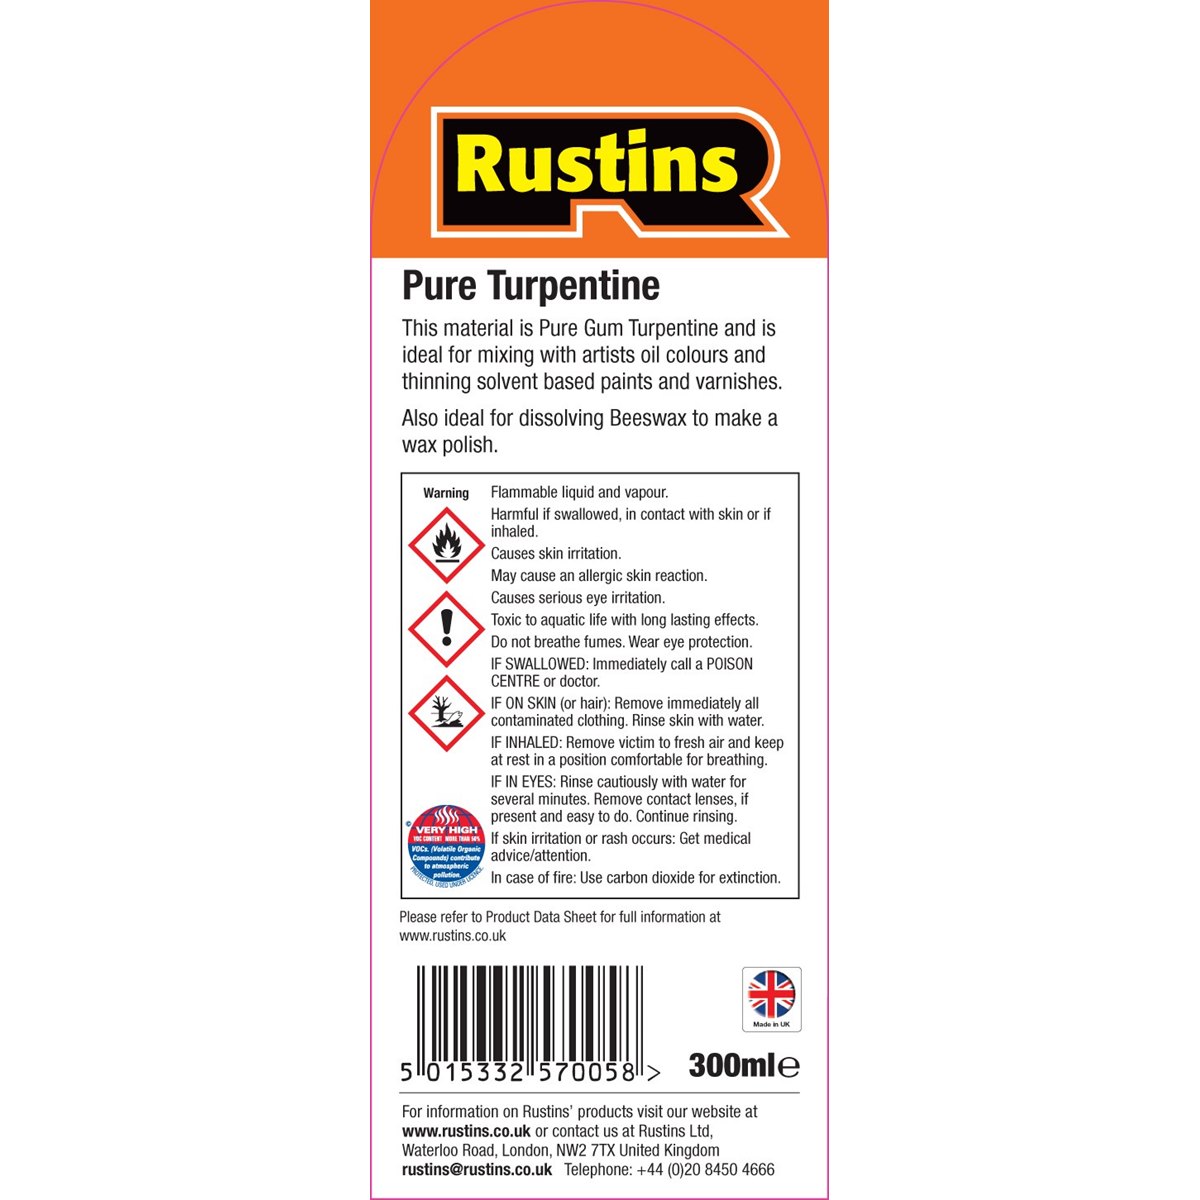 Rustins Pure Turpentine Usage Instructions